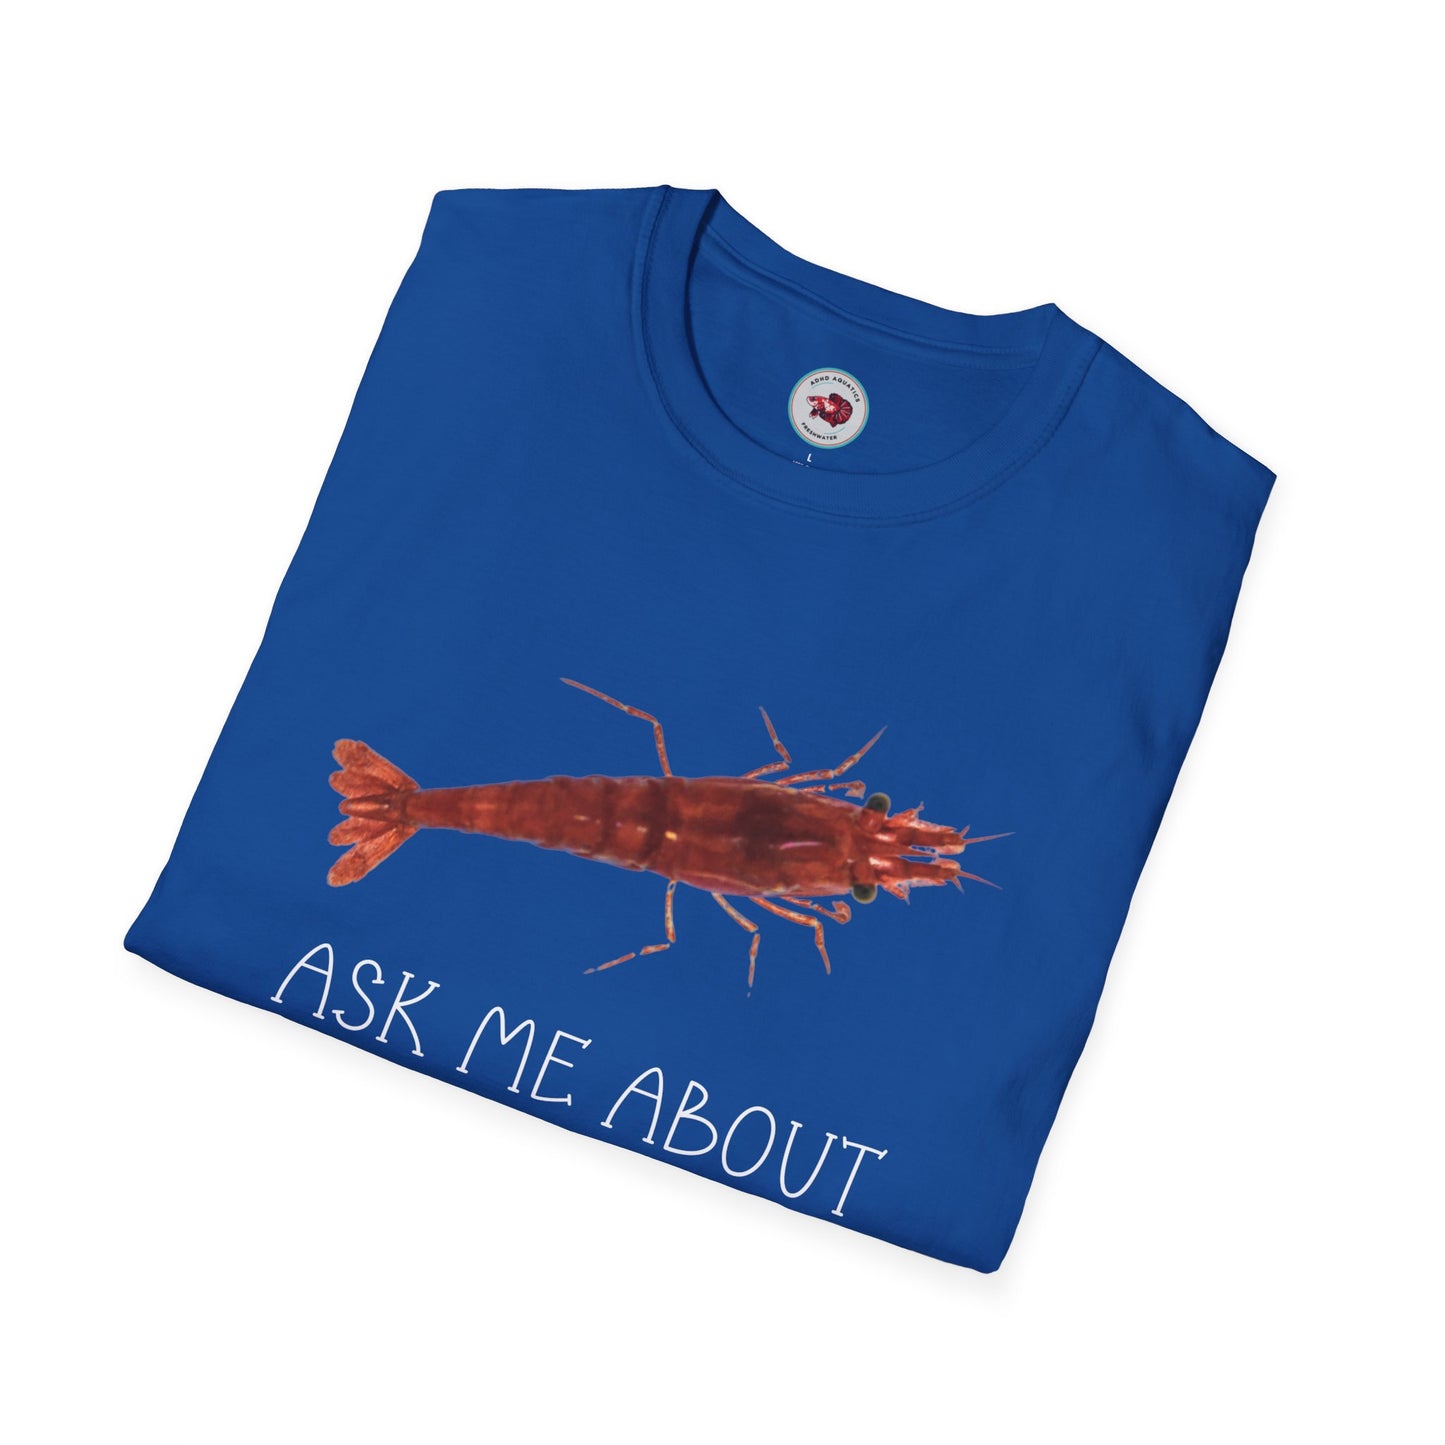 Ask Me About My Shrimp Unisex Softstyle T-Shirt by ADHD Aquatics